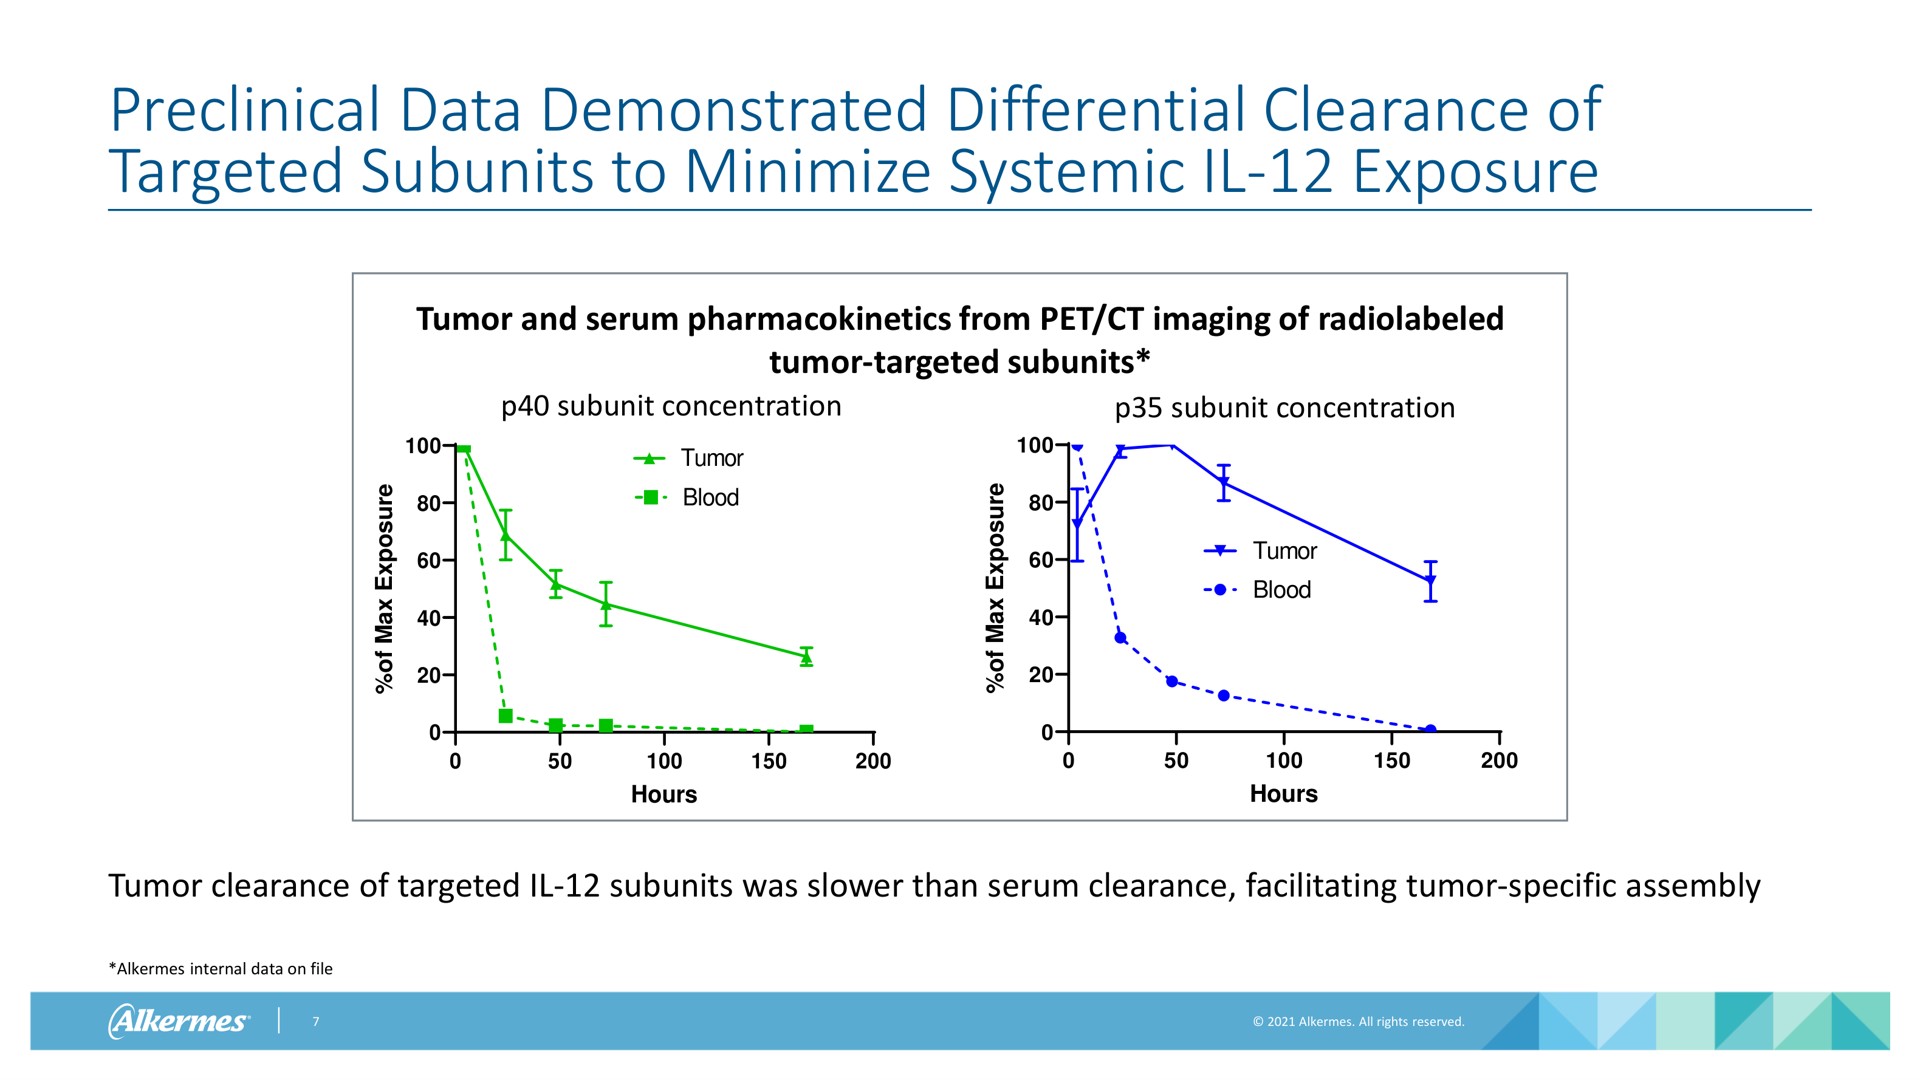 preclinical data demonstrated differential clearance of targeted subunits to minimize systemic exposure tumor and serum from pet imaging of tumor targeted subunits subunit concentration subunit concentration tumor blood hours tumor blood hours tumor clearance of targeted subunits was than serum clearance facilitating tumor specific assembly alkermes internal data on file a a | Alkermes